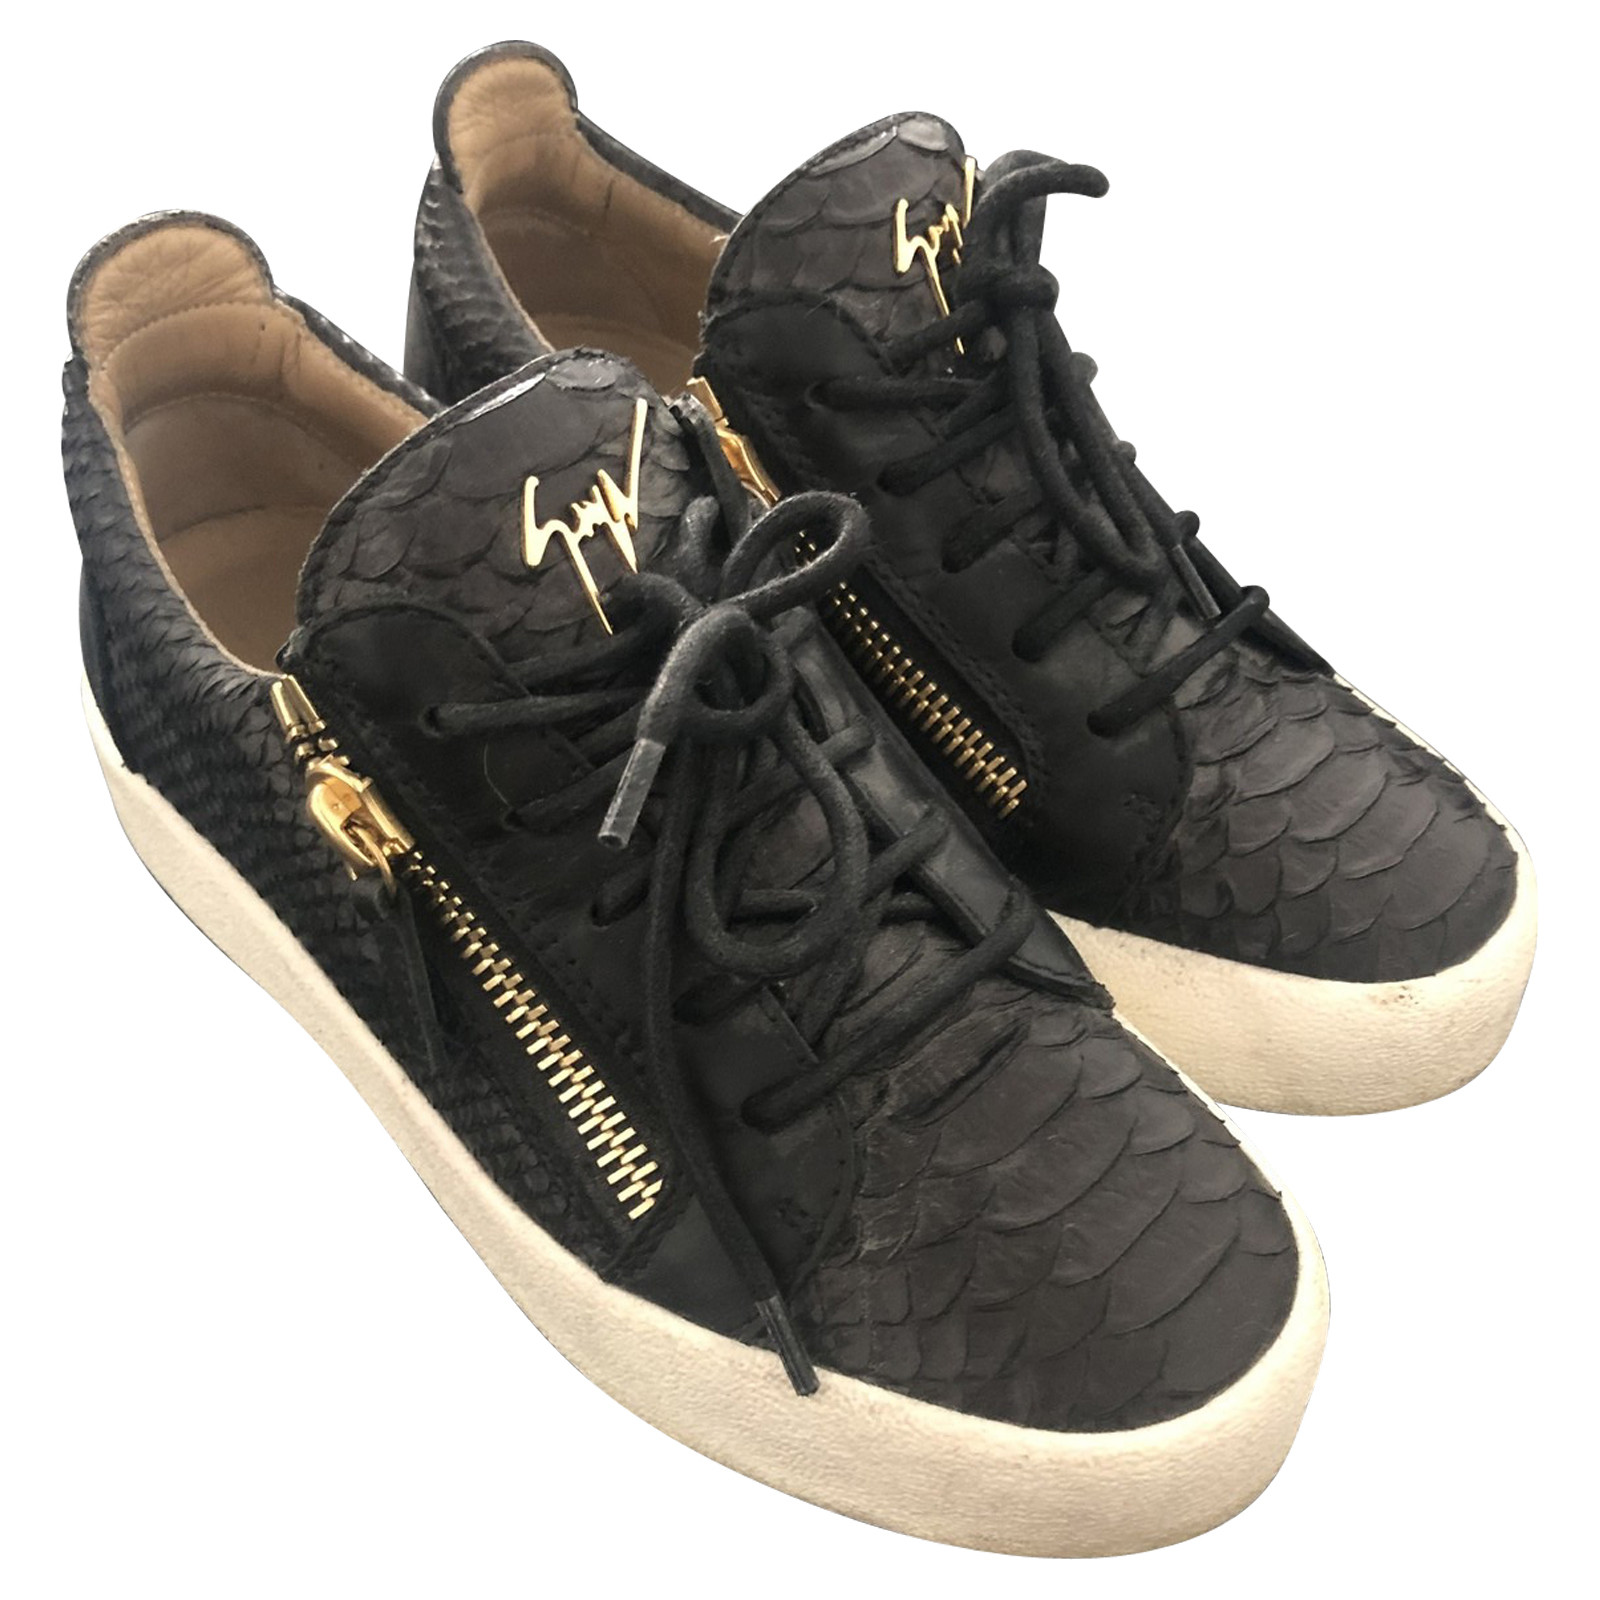 Giuseppe Trainers Leather in Black - Second Hand Giuseppe Zanotti Trainers Leather in Black buy used for 360€ (3830777)